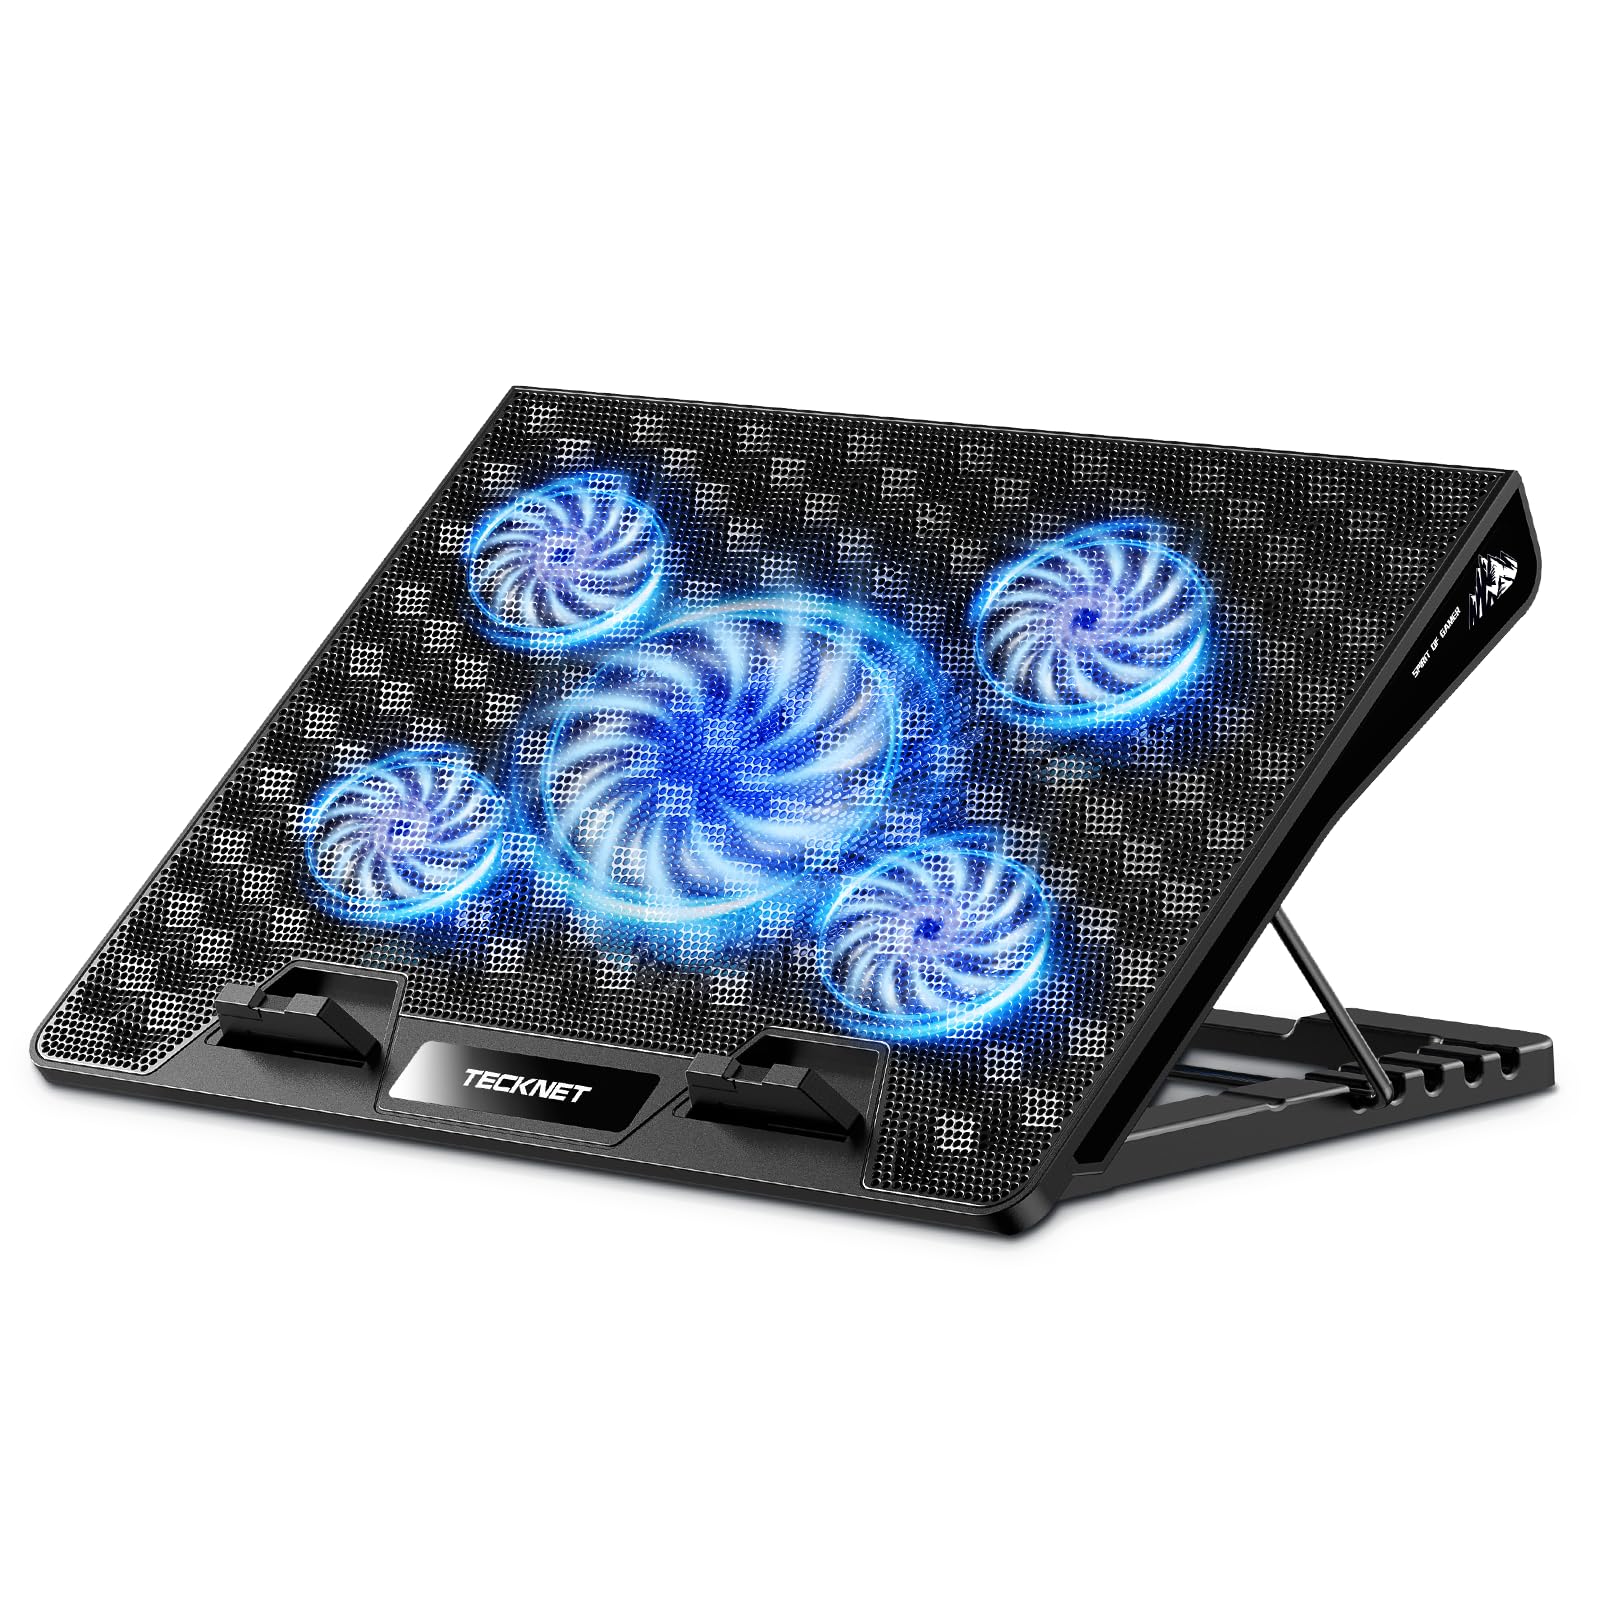 TECKNET 12 ''-17 ''inch Laptop Cooling Pad,5 Quiet Cooling Fans Laptop Cooler with 5 Adjustable Height, Laptop Cooling Stand for with Speed Controller, 2 USB Port - Blue